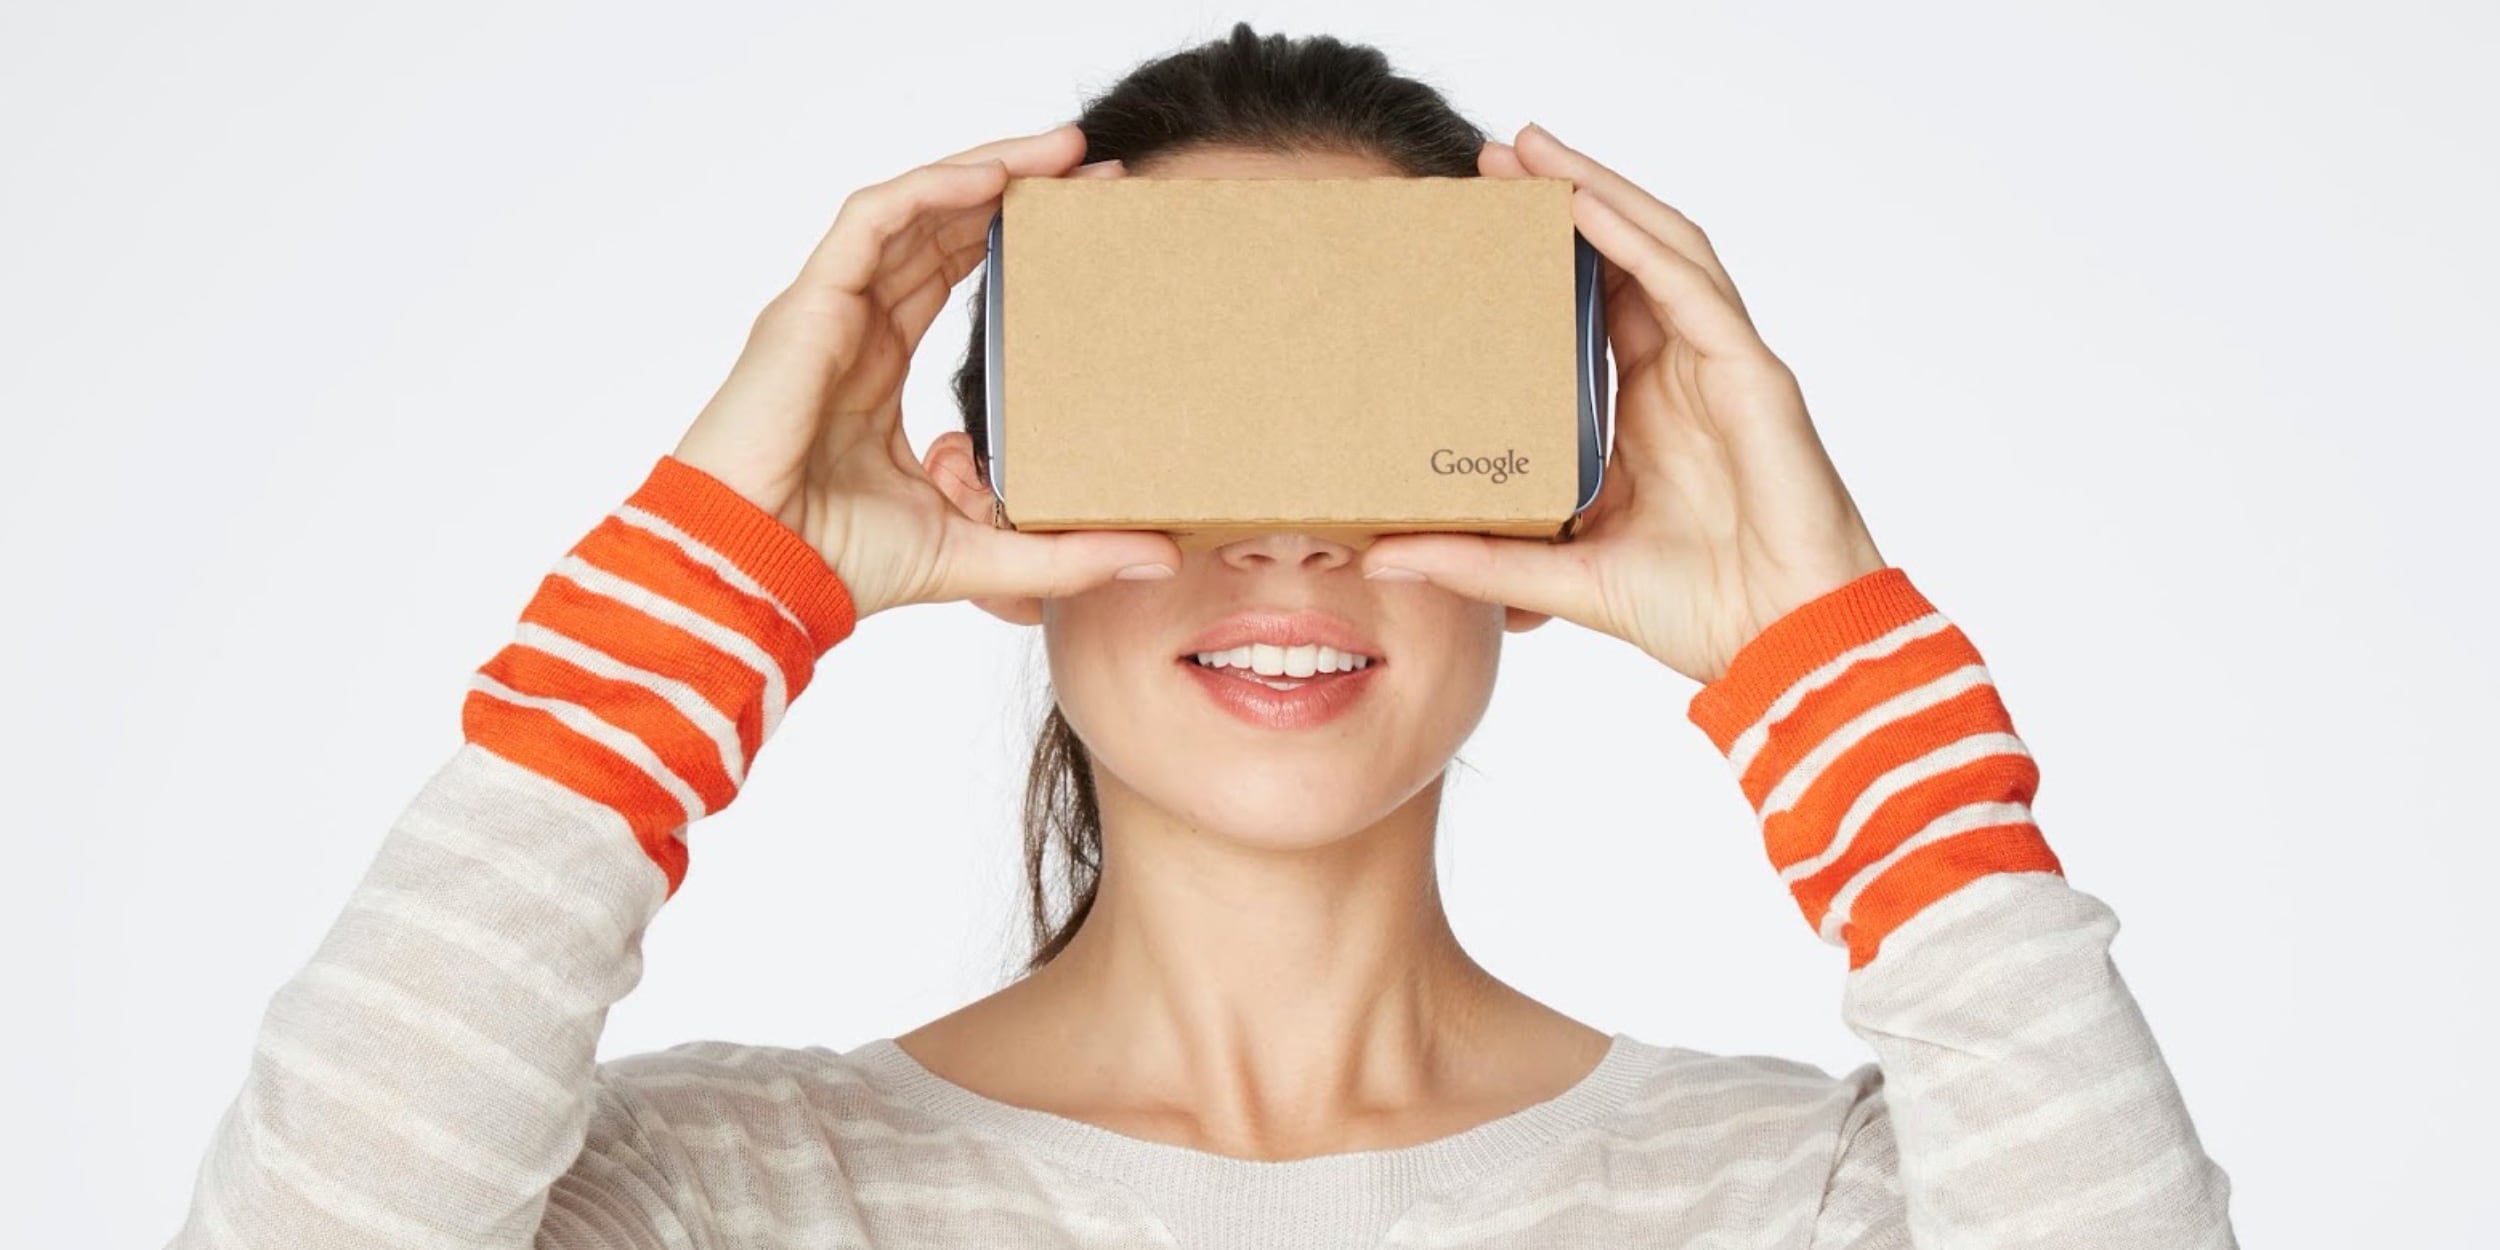 google-open-sources-cardboard-to-keep-no-frills-vr-widely-available